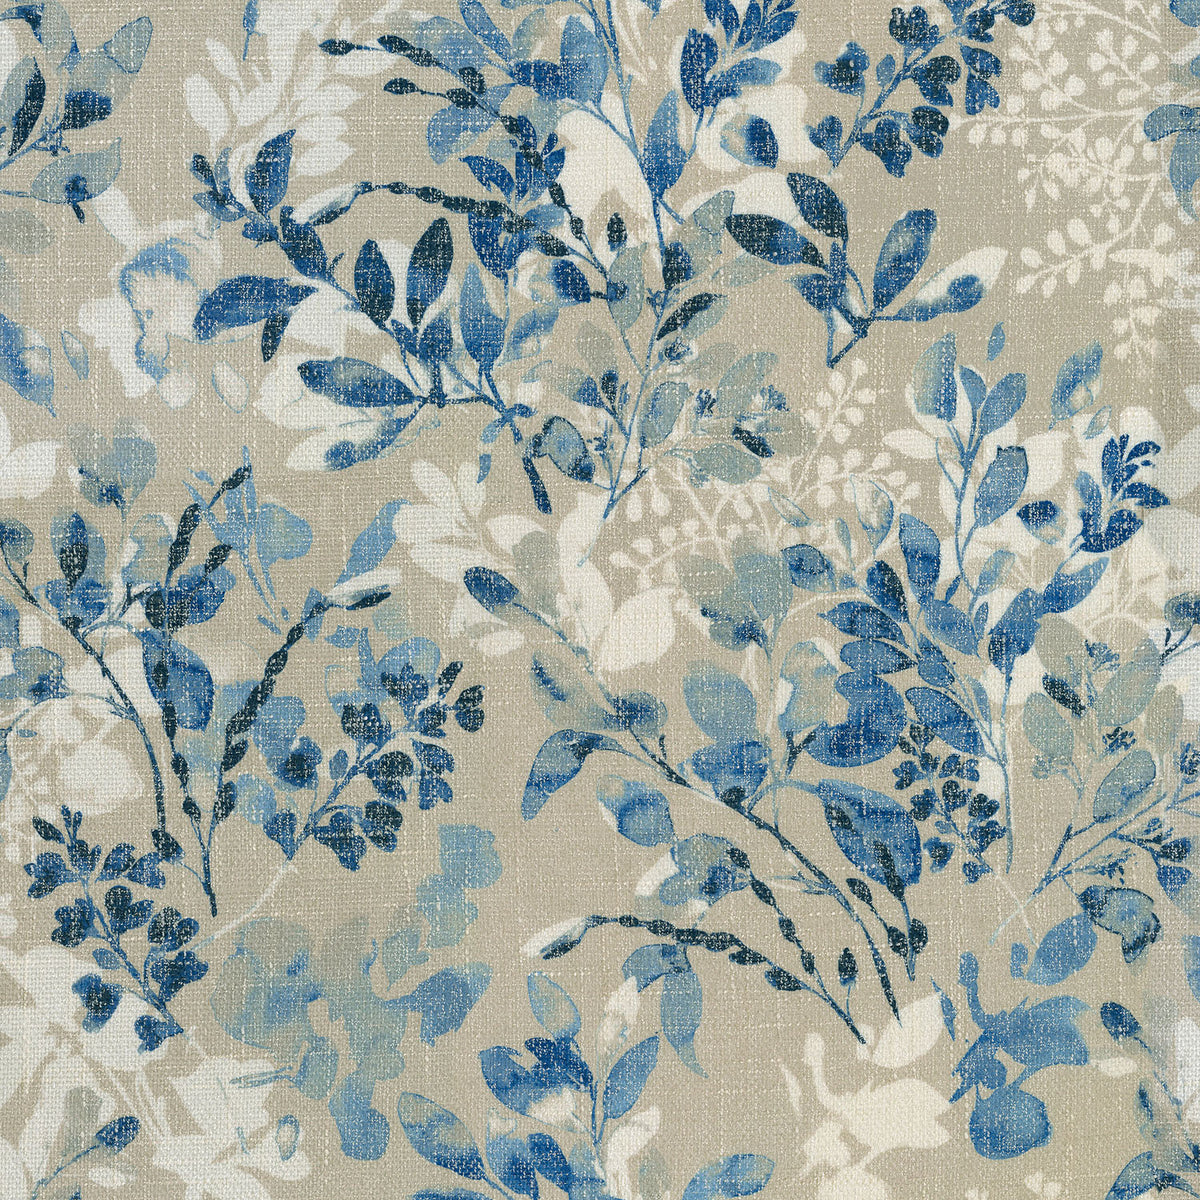 P/K Lifestyles Willow Wood - Luna 409312 Upholstery Fabric